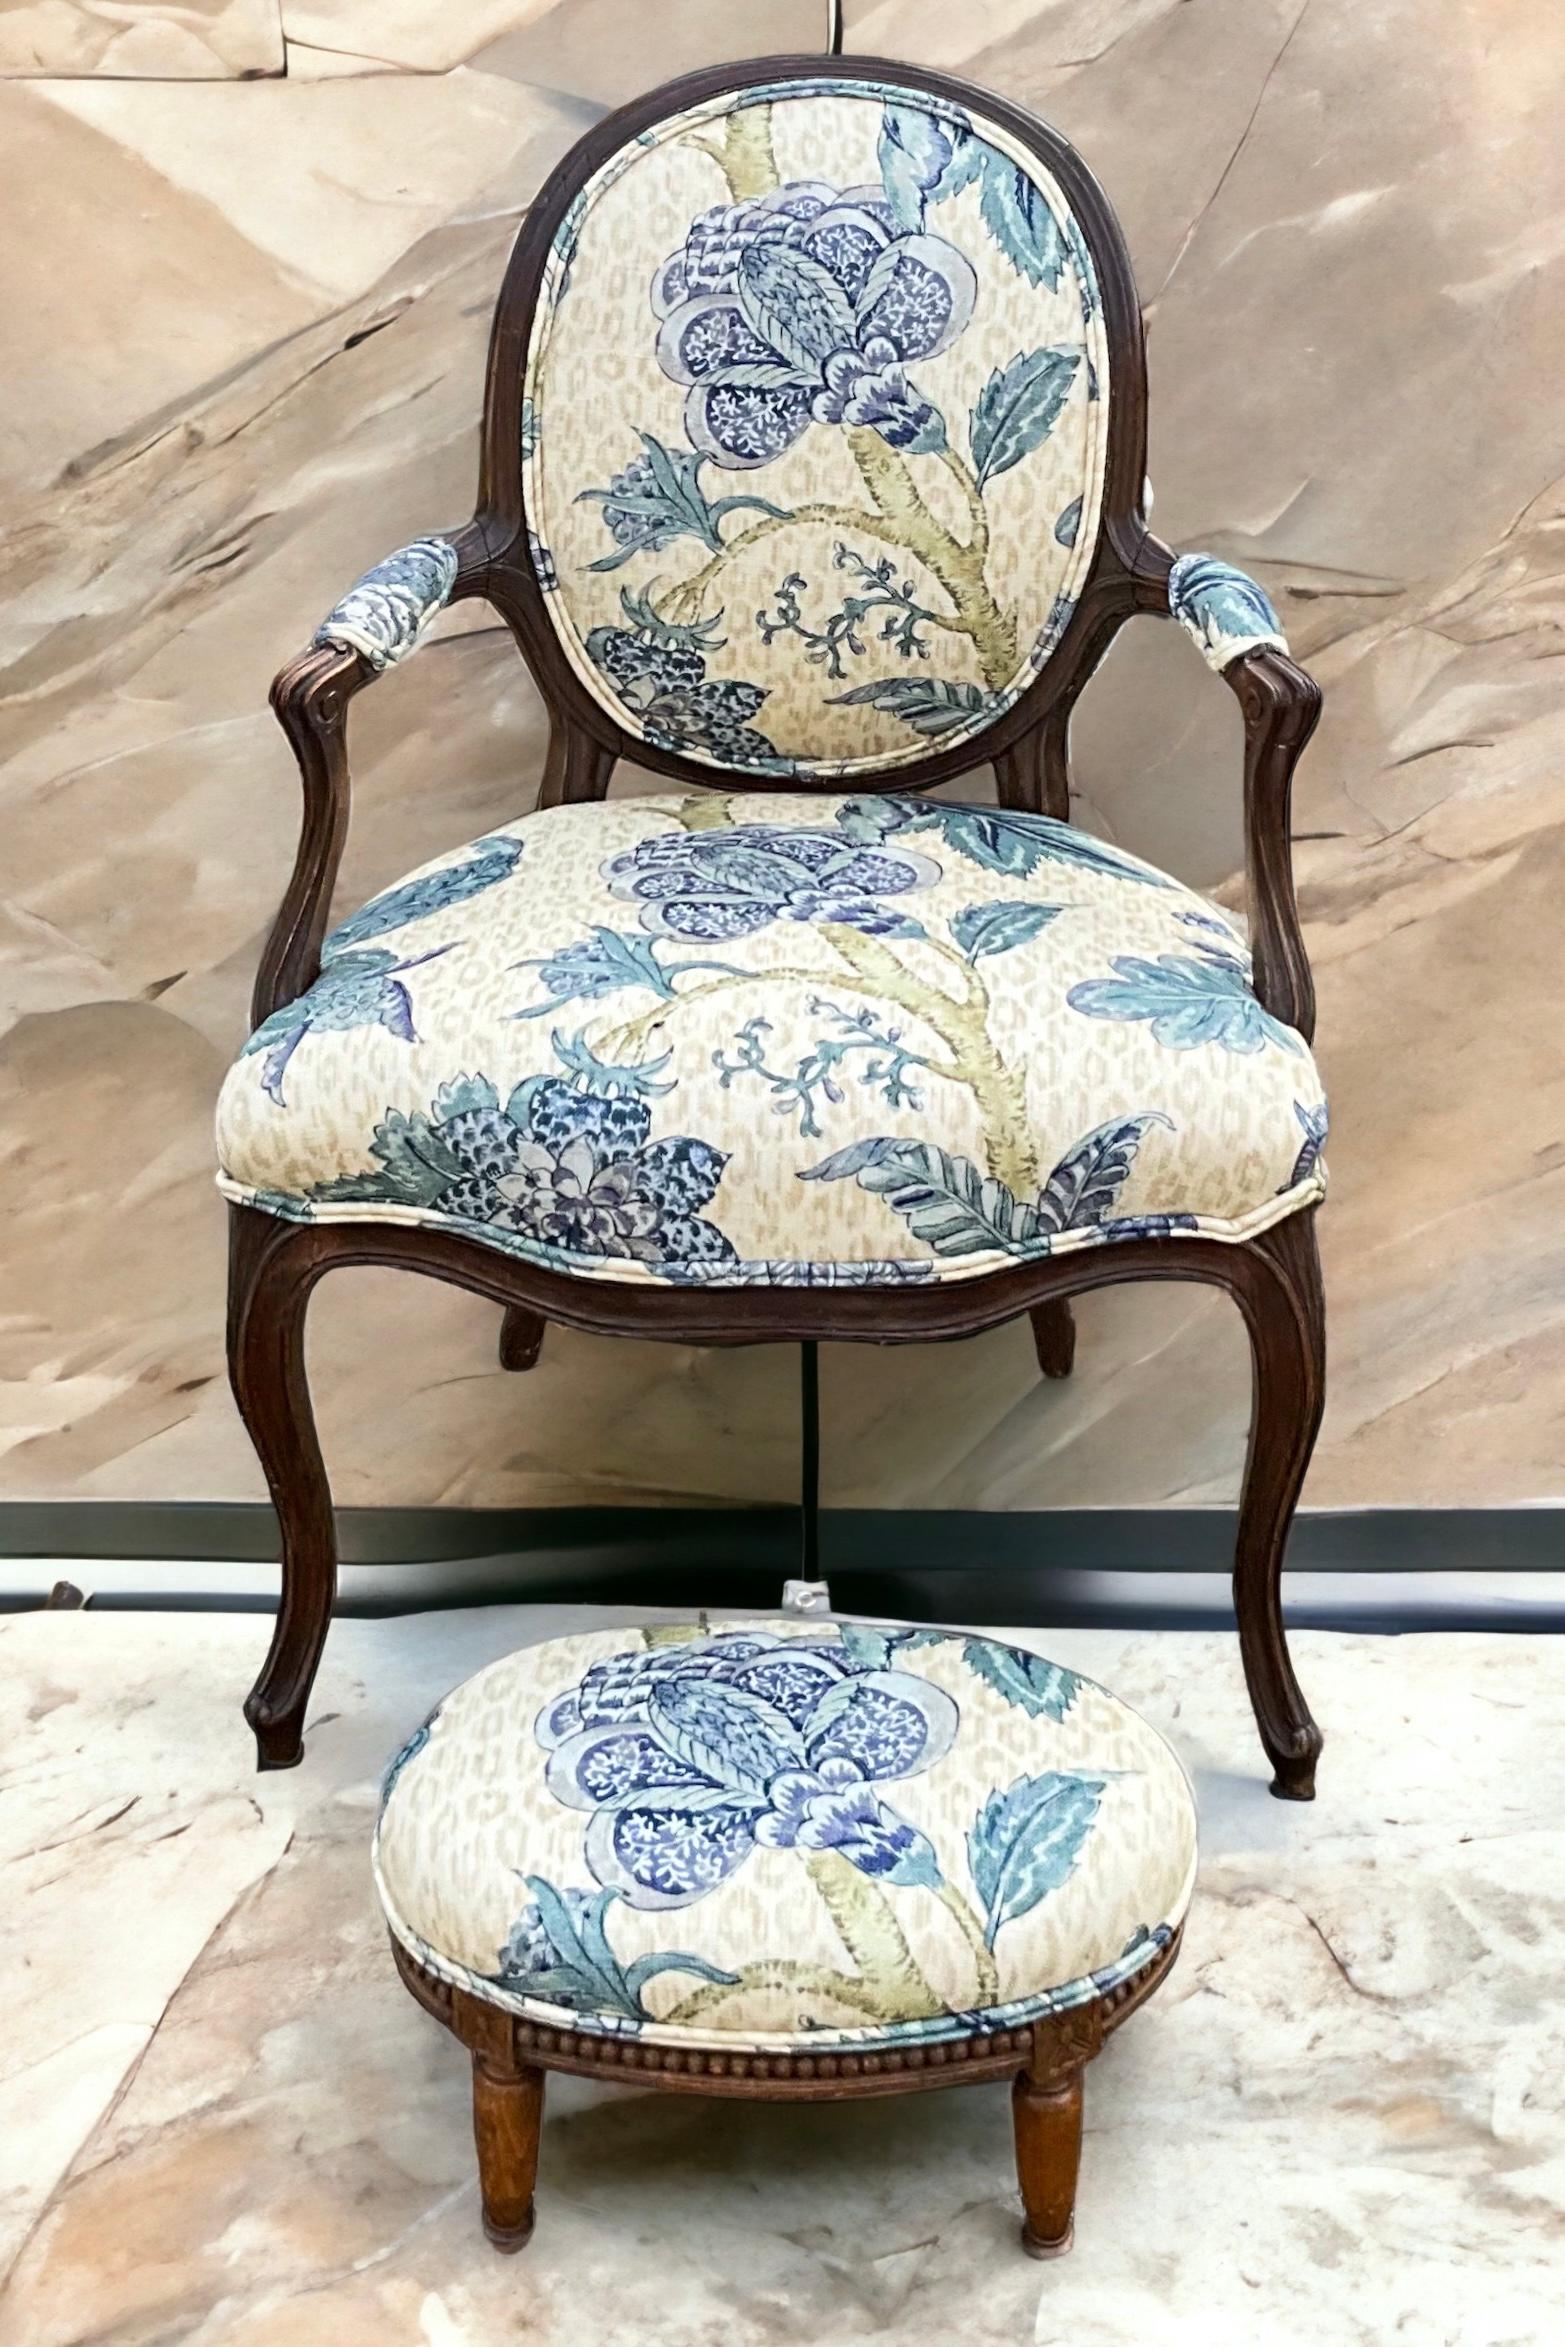 This is an early 20th century French carved fruitwood bergere  chair newly upholstered in a blue floral with neutral leopard background. The fabric is linen. The stool came with the chair but is not quite as old as the chair nor the same wood. It